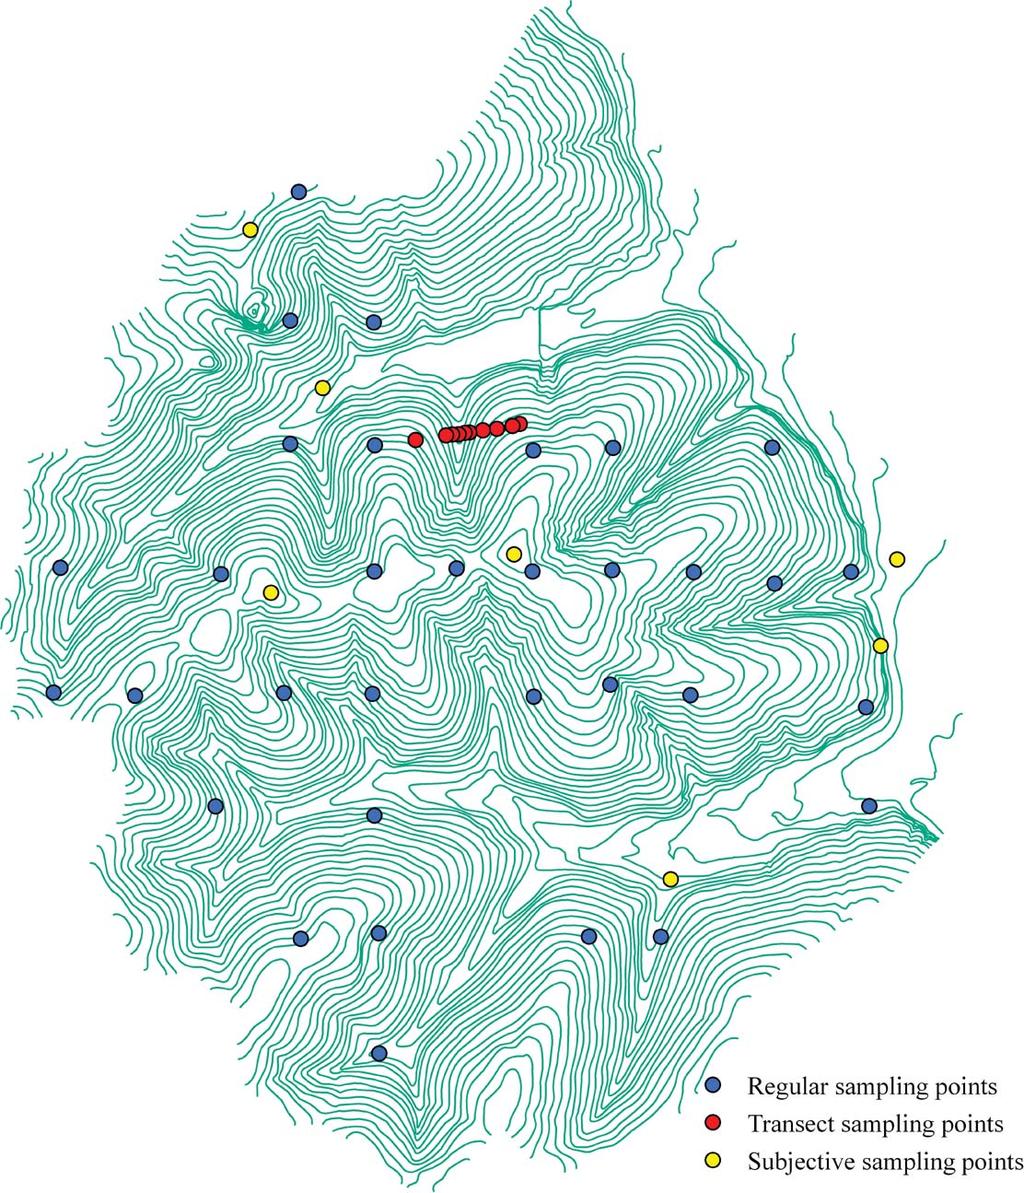 16 L. Yang et al. Figure 10. Location of validation points on contour lines in the study area. points which were used to validate the overall performance of the inferred soil maps.